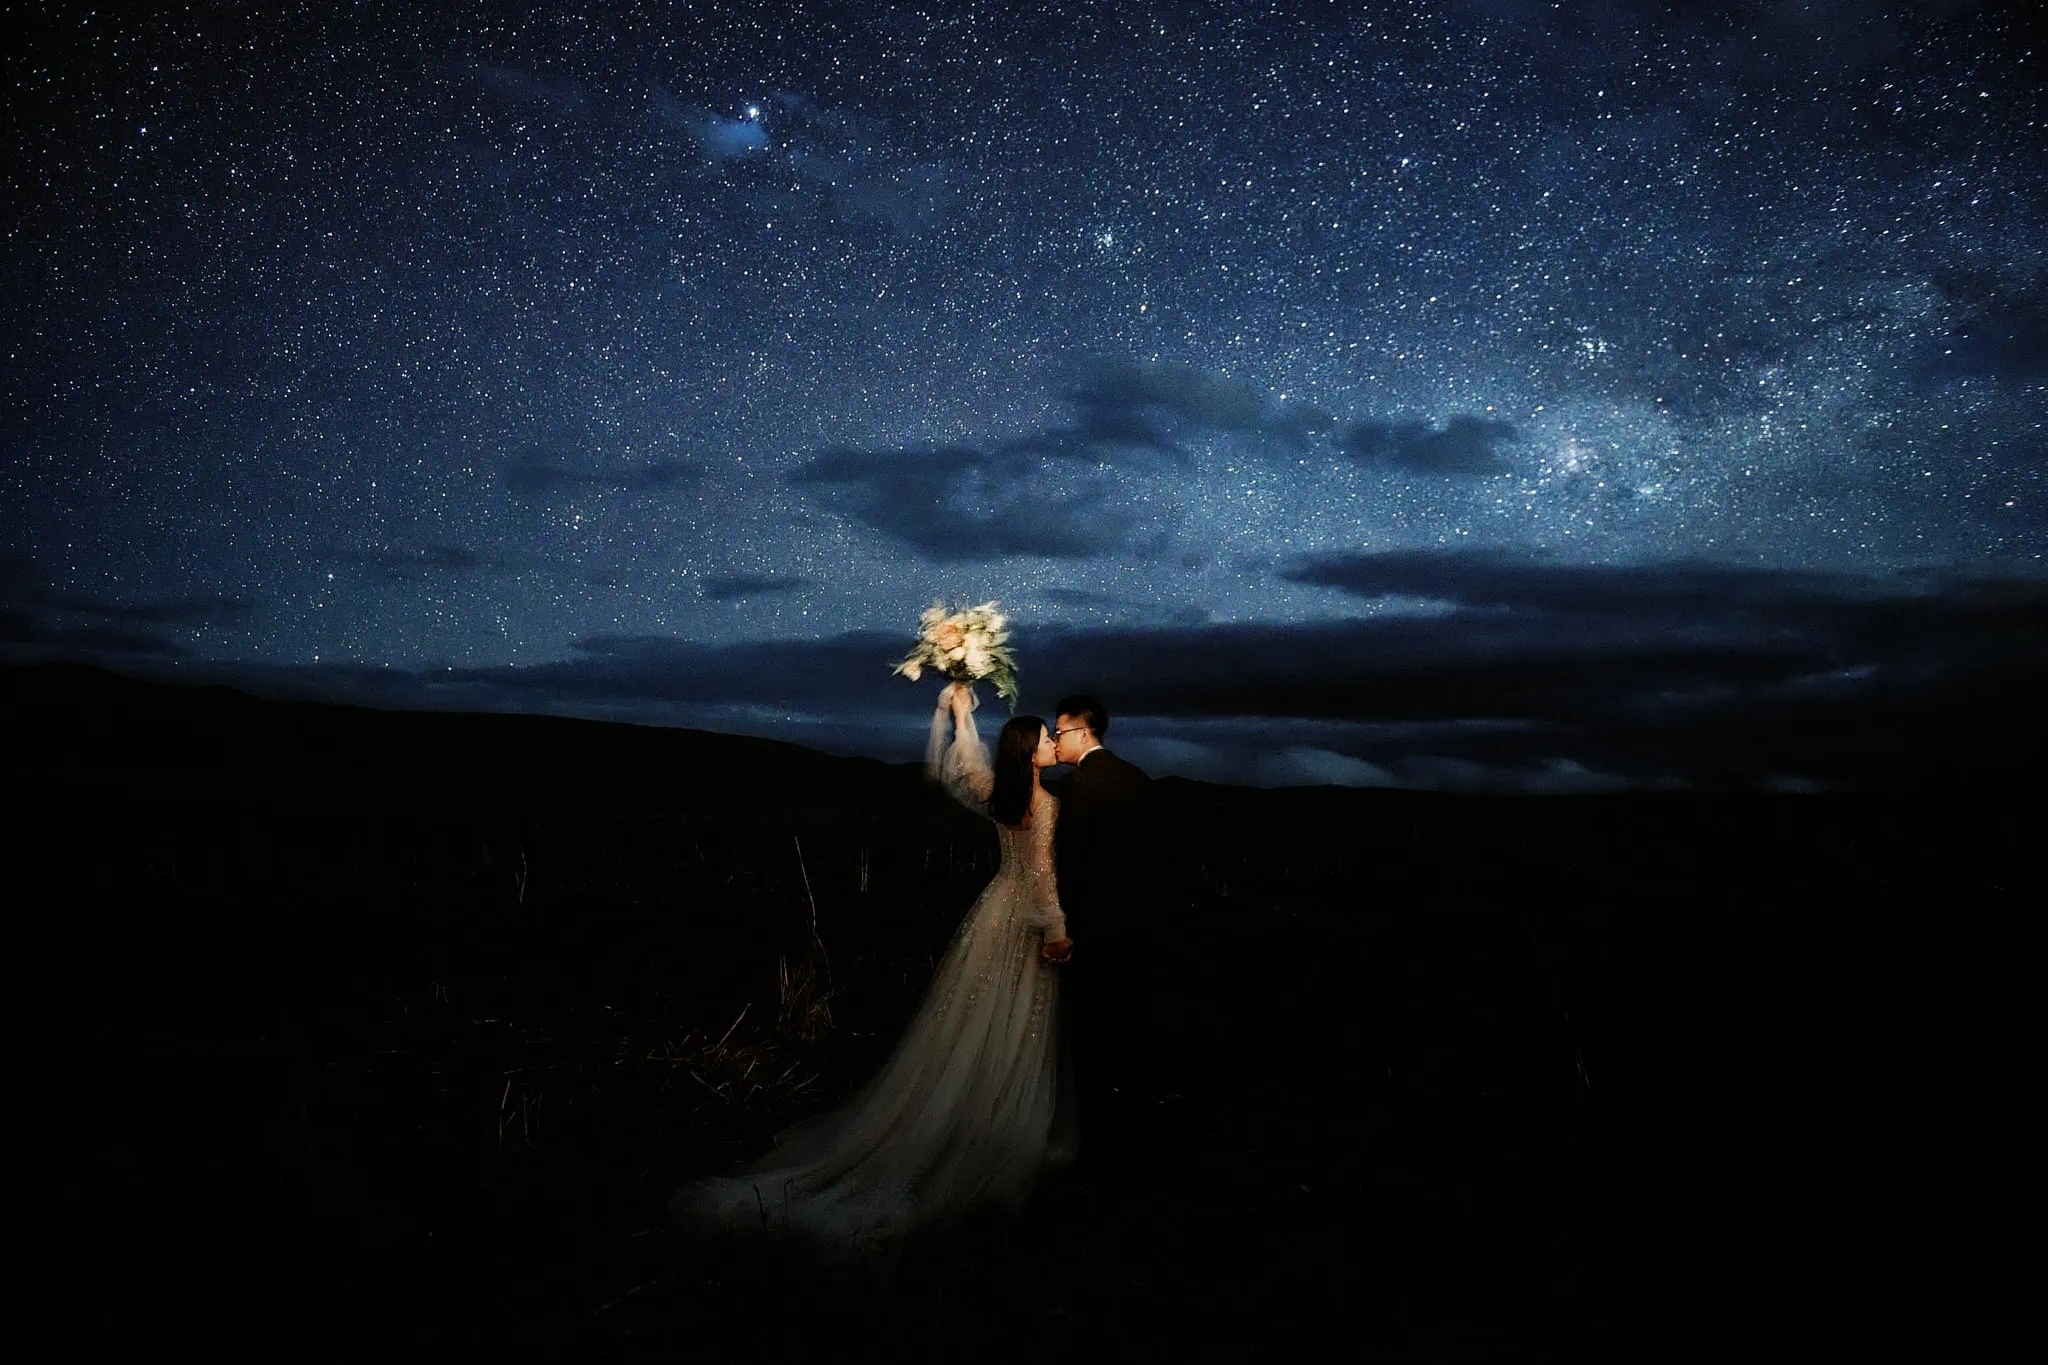 Queenstown New Zealand Elopement Wedding Photographer - A starry night shoot featuring a bride and groom in our portfolio.